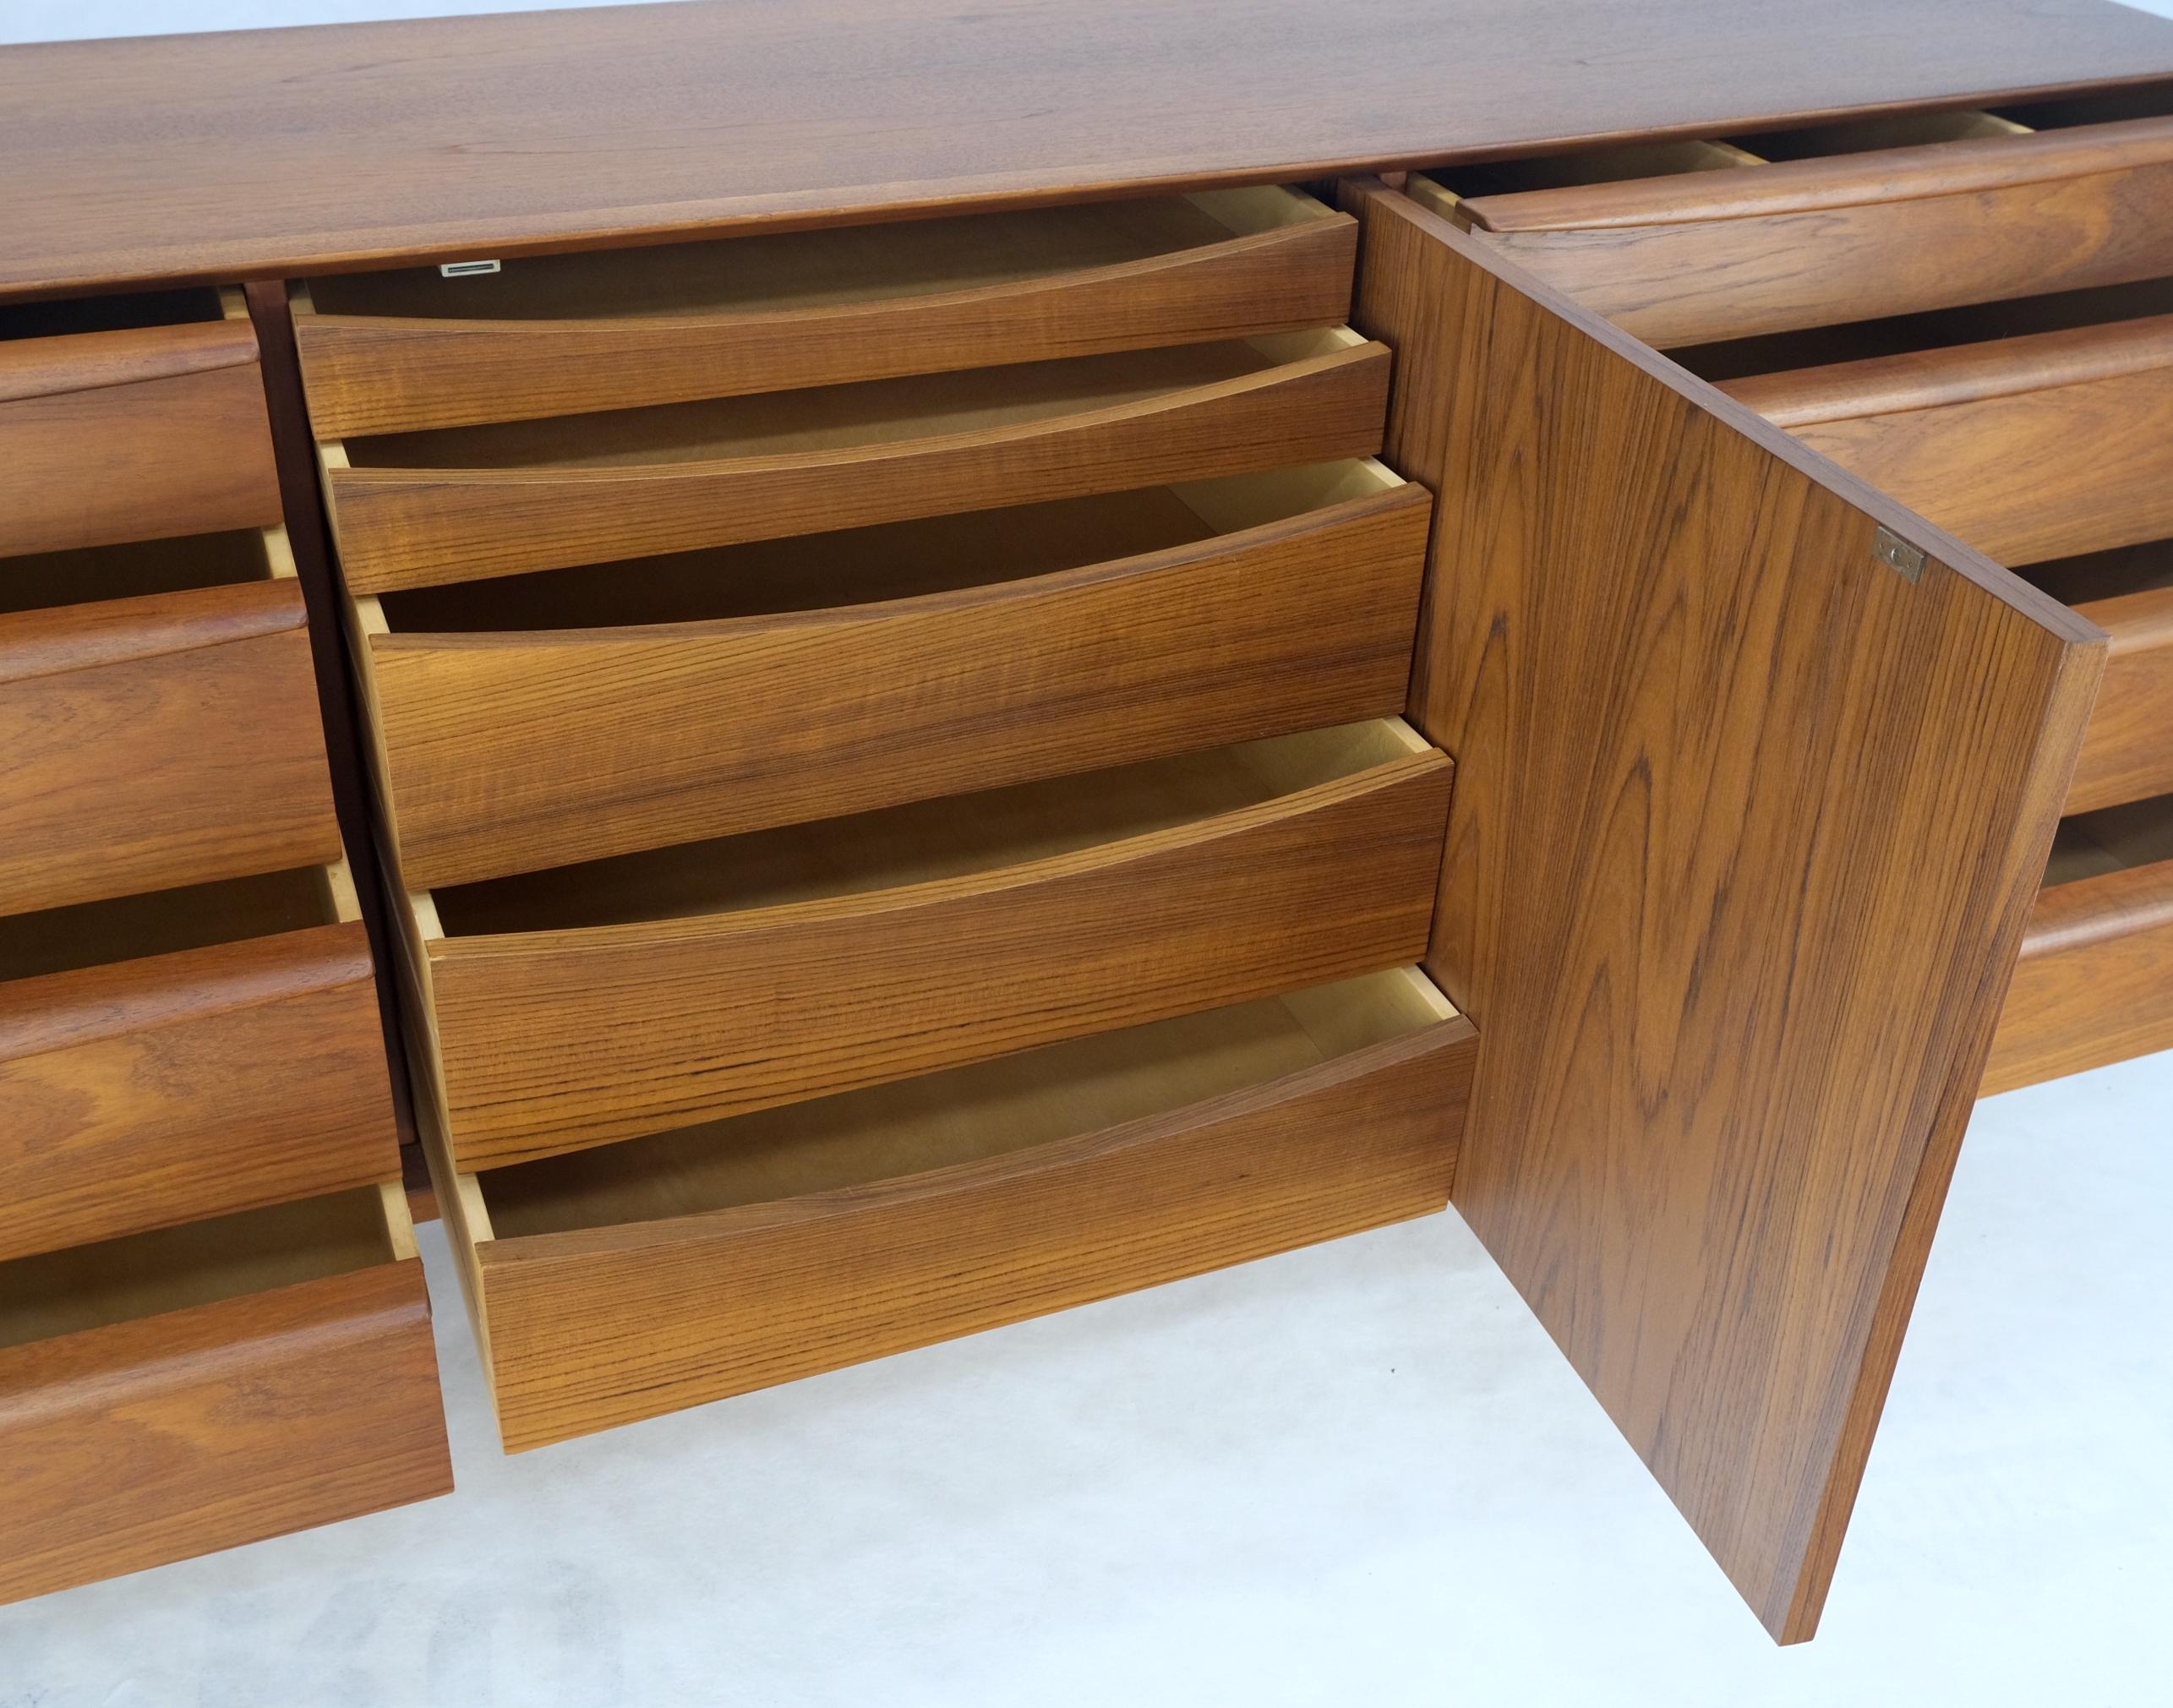 Lacquered Danish Teak Mid-Century Modern 13 Drawers Long Credenza Dresser Sideboard MINT! For Sale